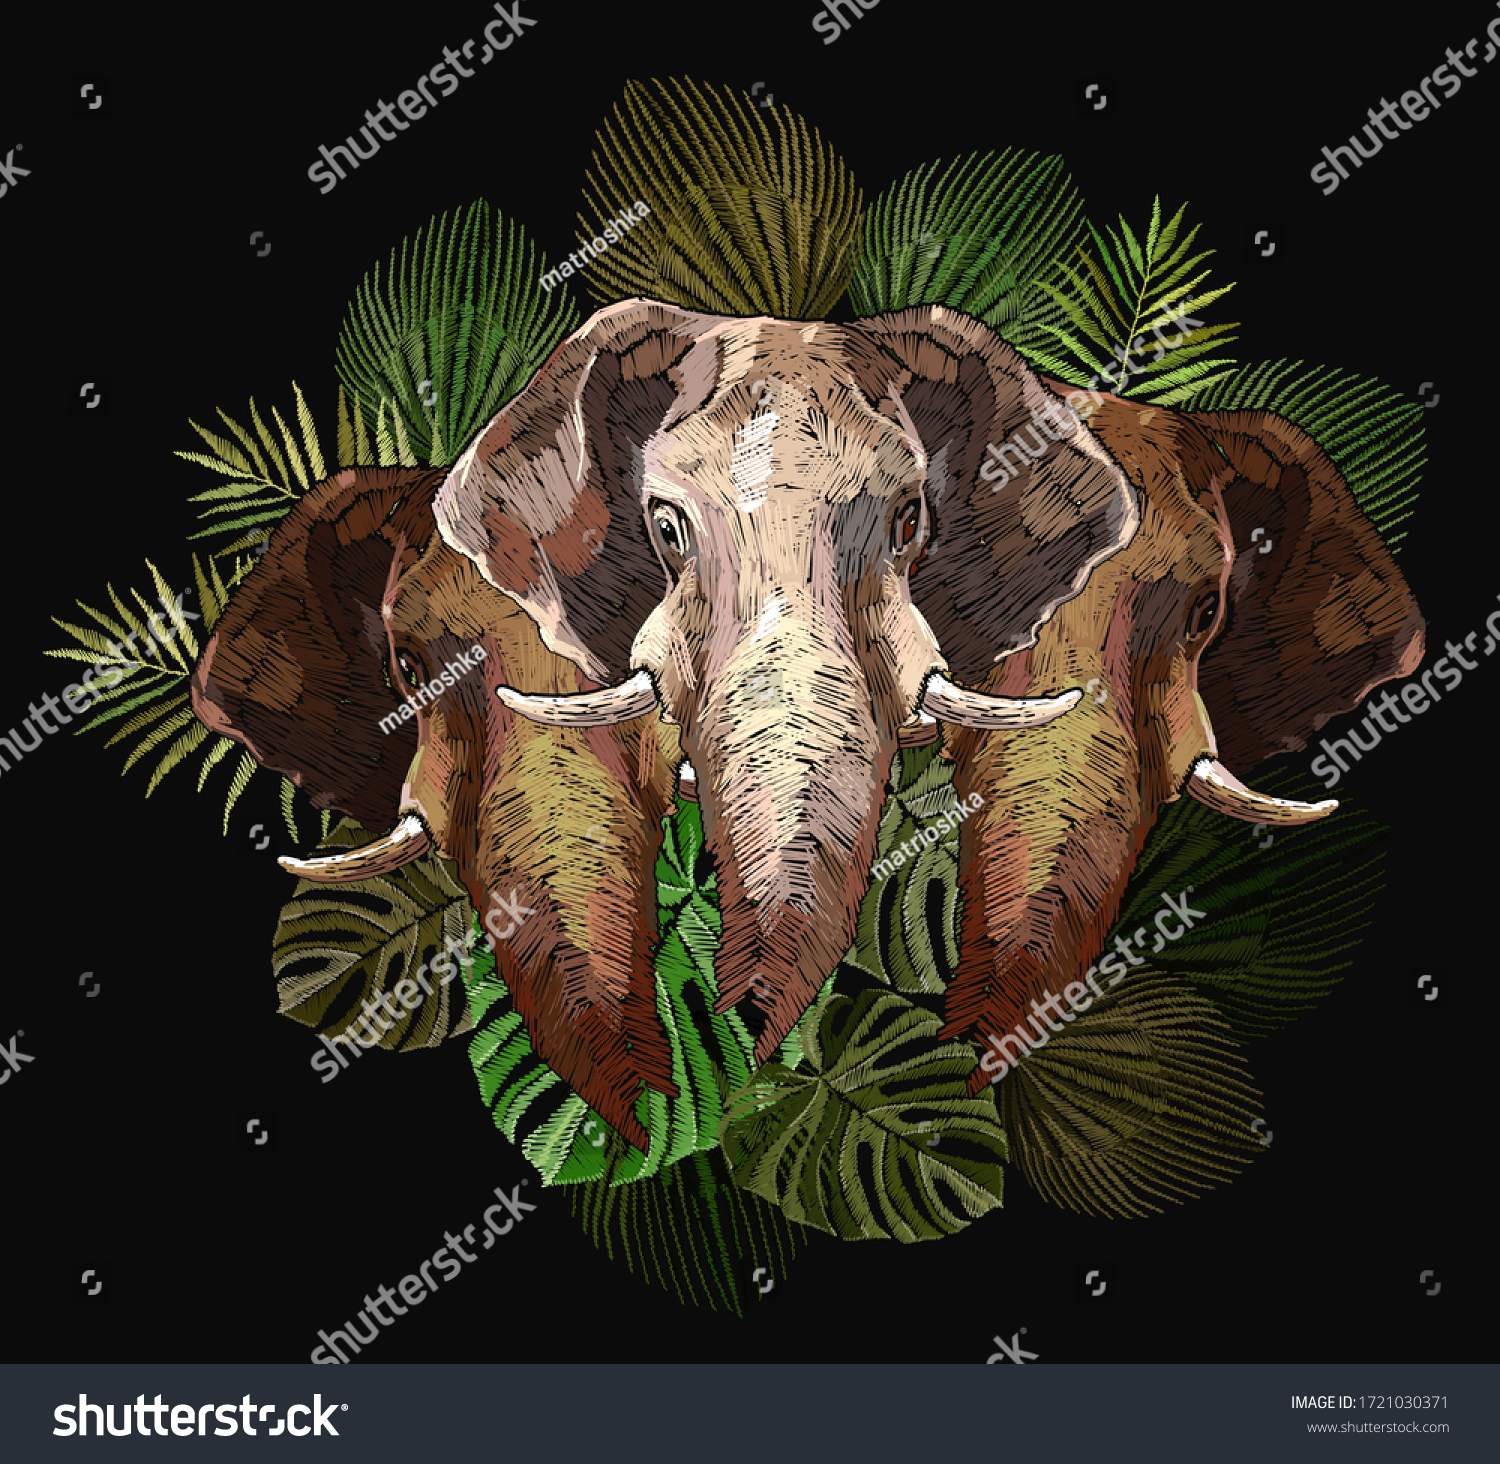 SVG of Three elephants head and palm leaves. Embroidery. Indian jungle animals. Template for clothes, textiles, t-shirt design. Wildlife art  svg